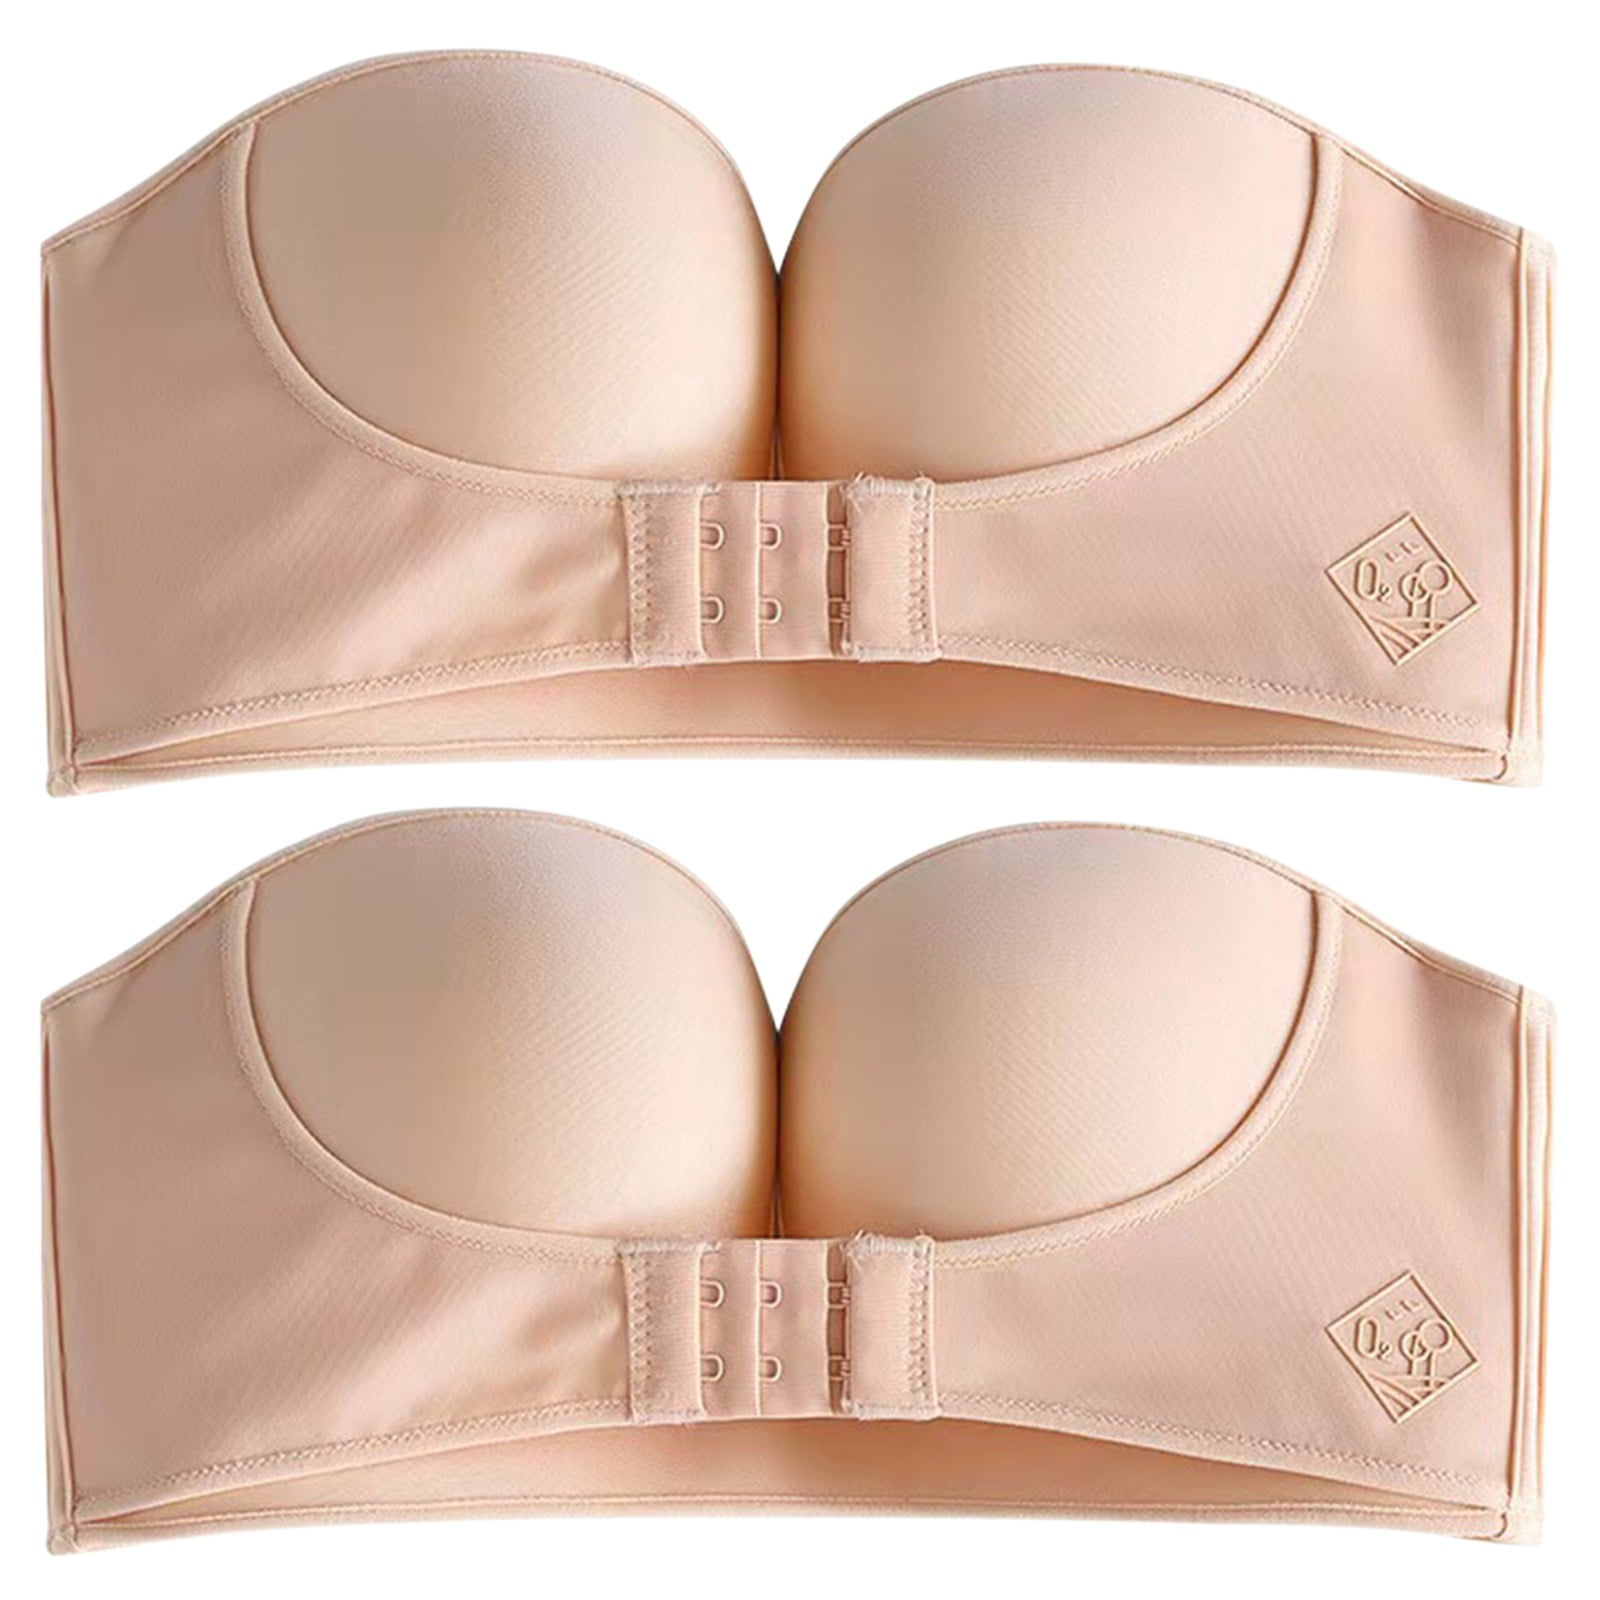 Brastop  D-K Cup Experts Since 2003 على X: Scantilly is what every  fuller bust girls' dreams are made of, hands down! Being an H cup, it's  always been really difficult to